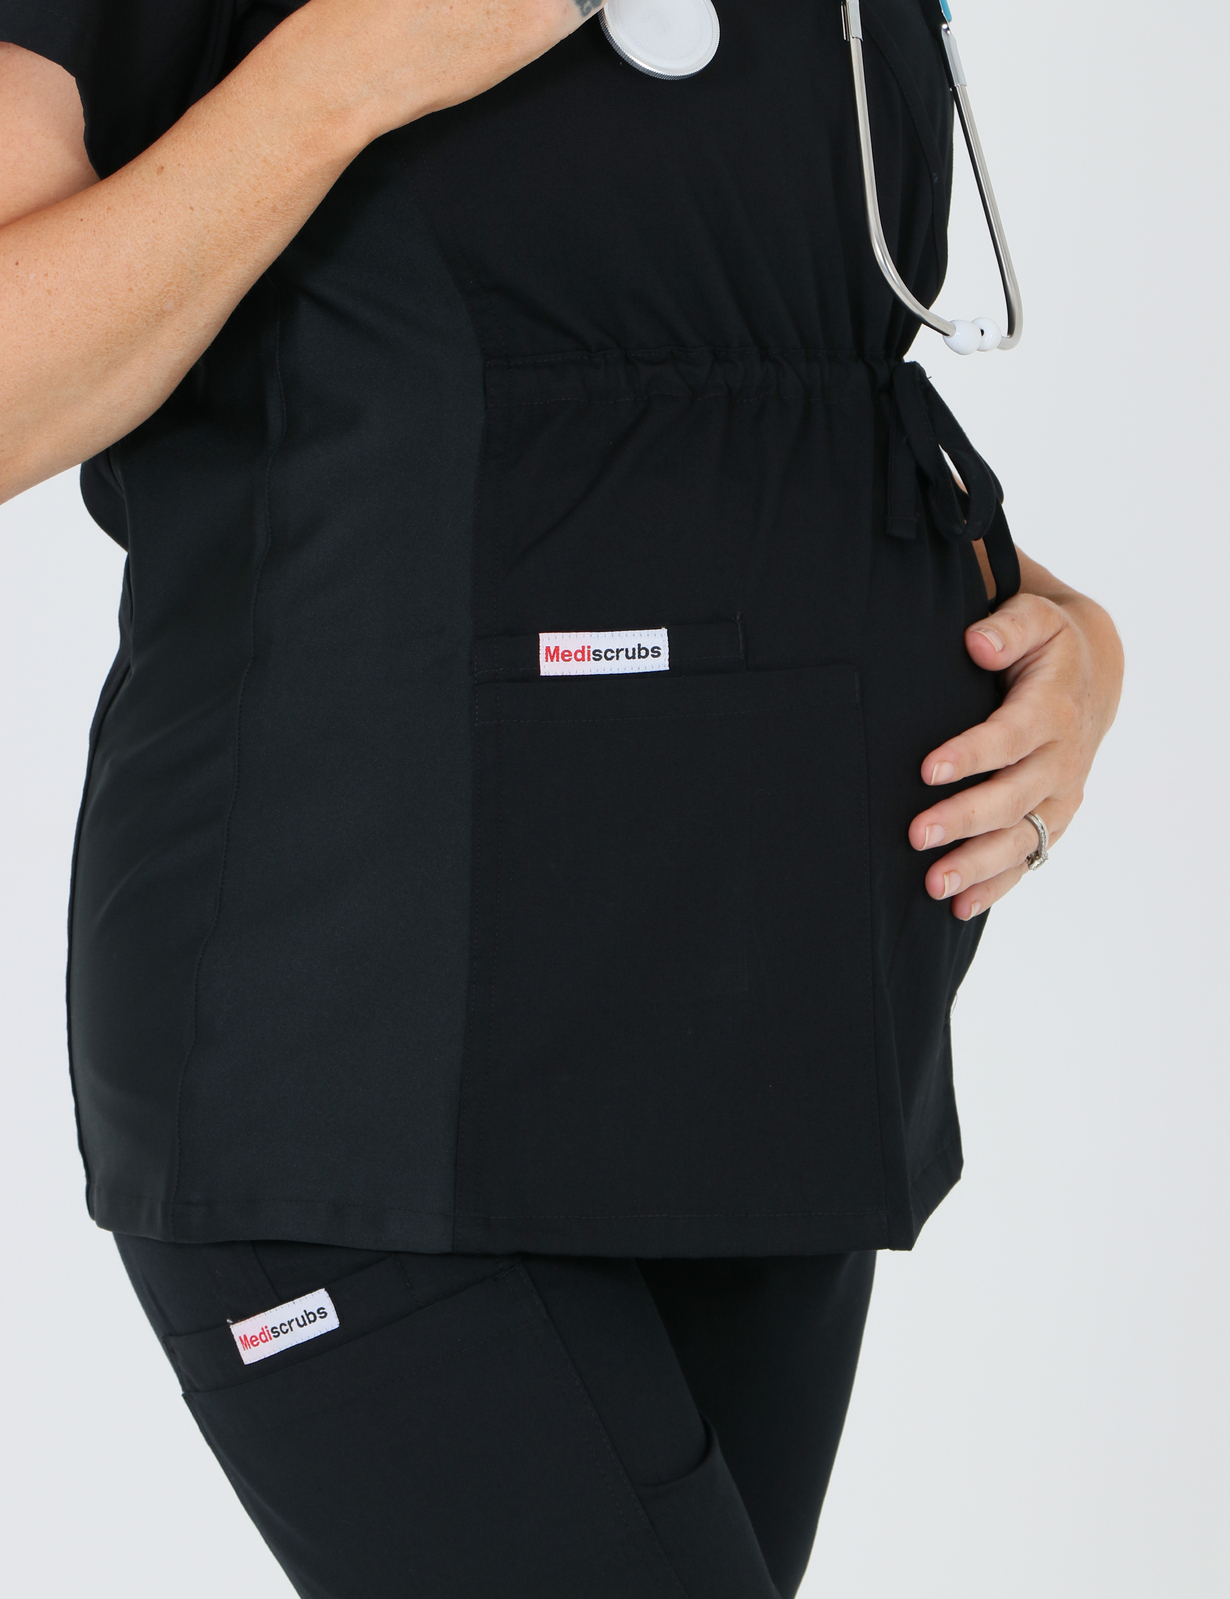 North Shore Private Radiologist Uniform Top Only Bundle (Maternity Spandex Top in Black + Logo) 